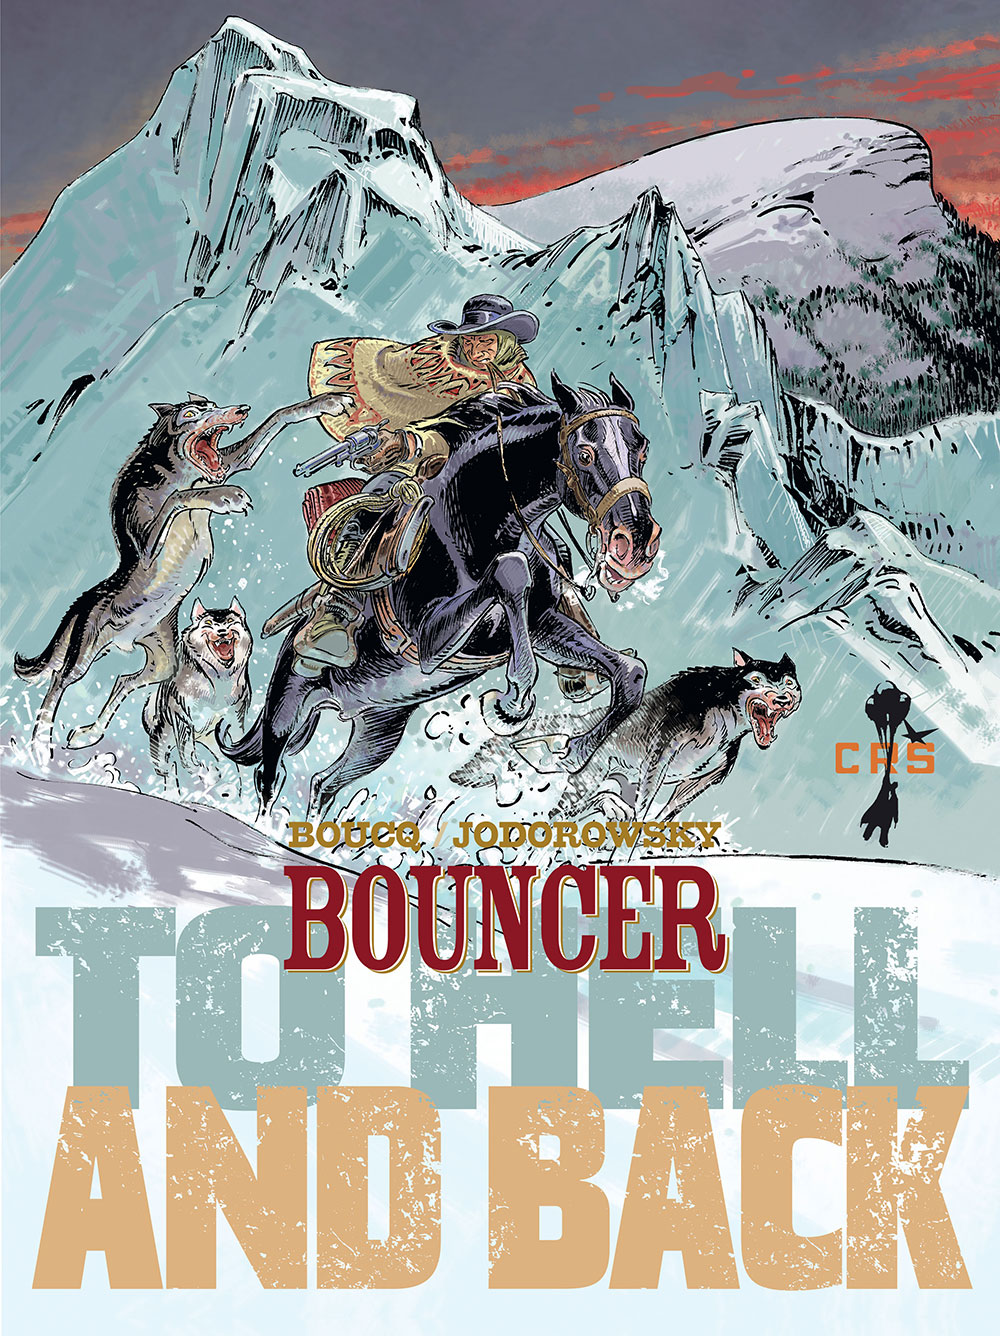 Bouncer – To hell and back